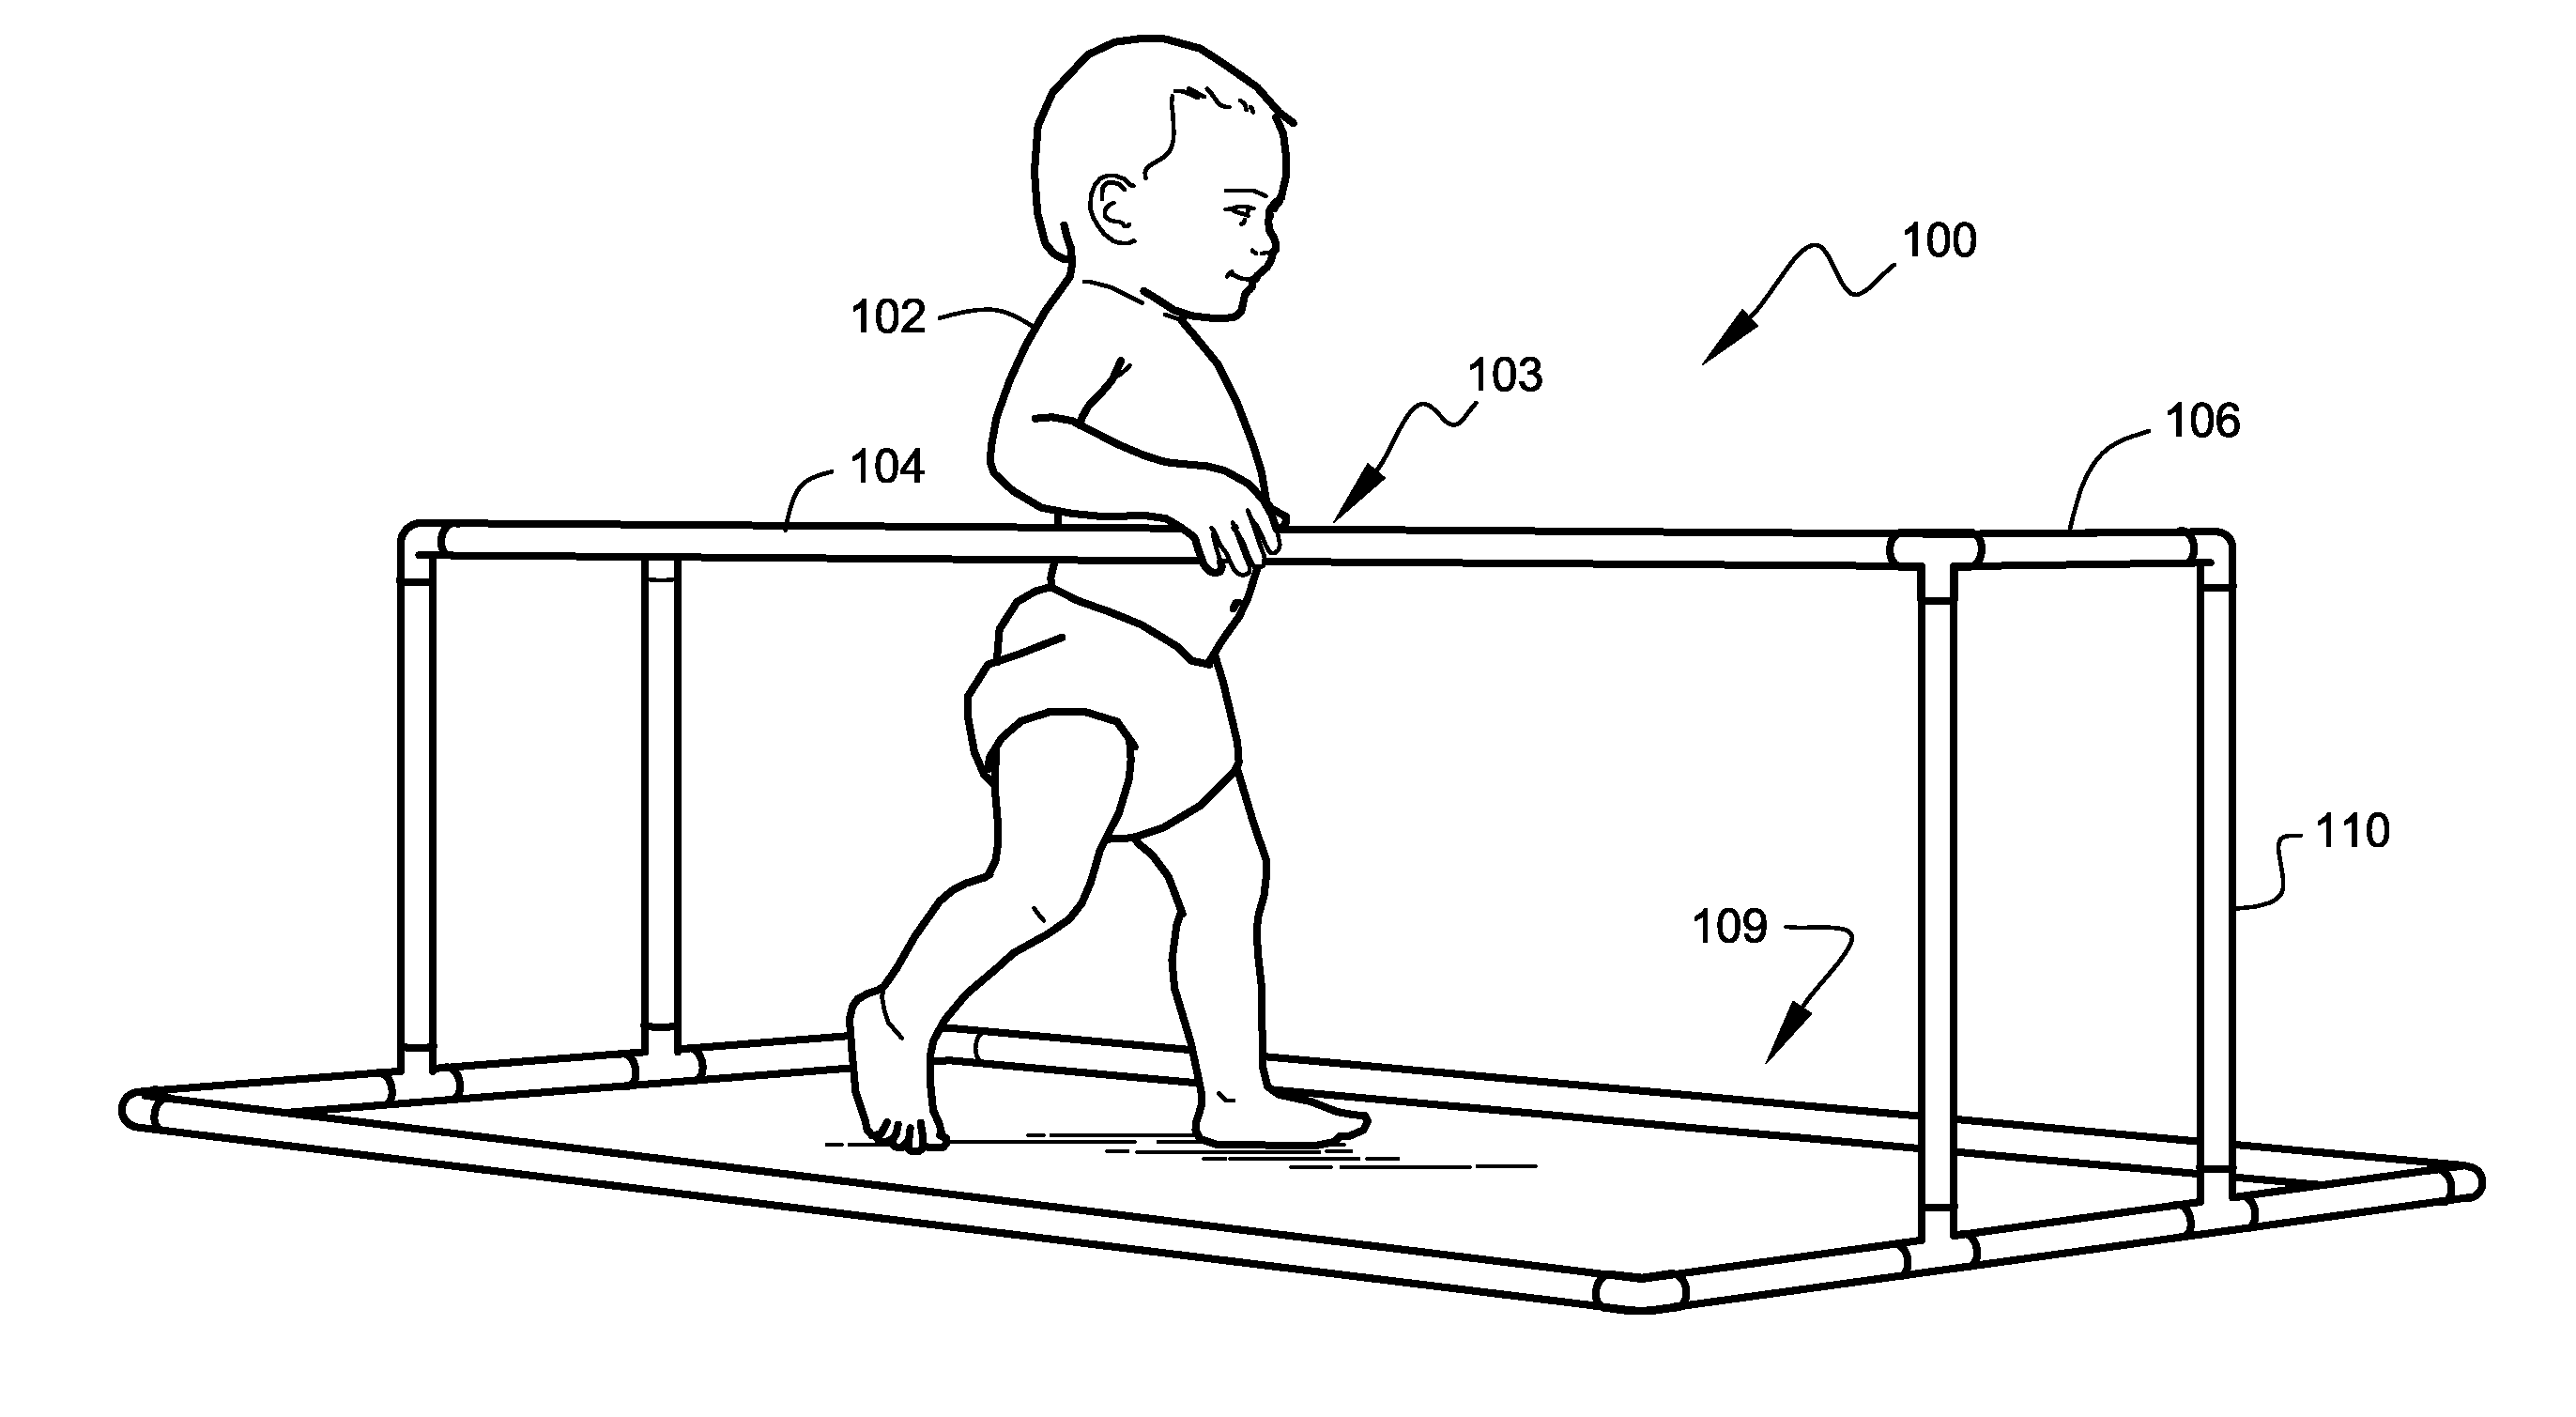 Infant activity systems